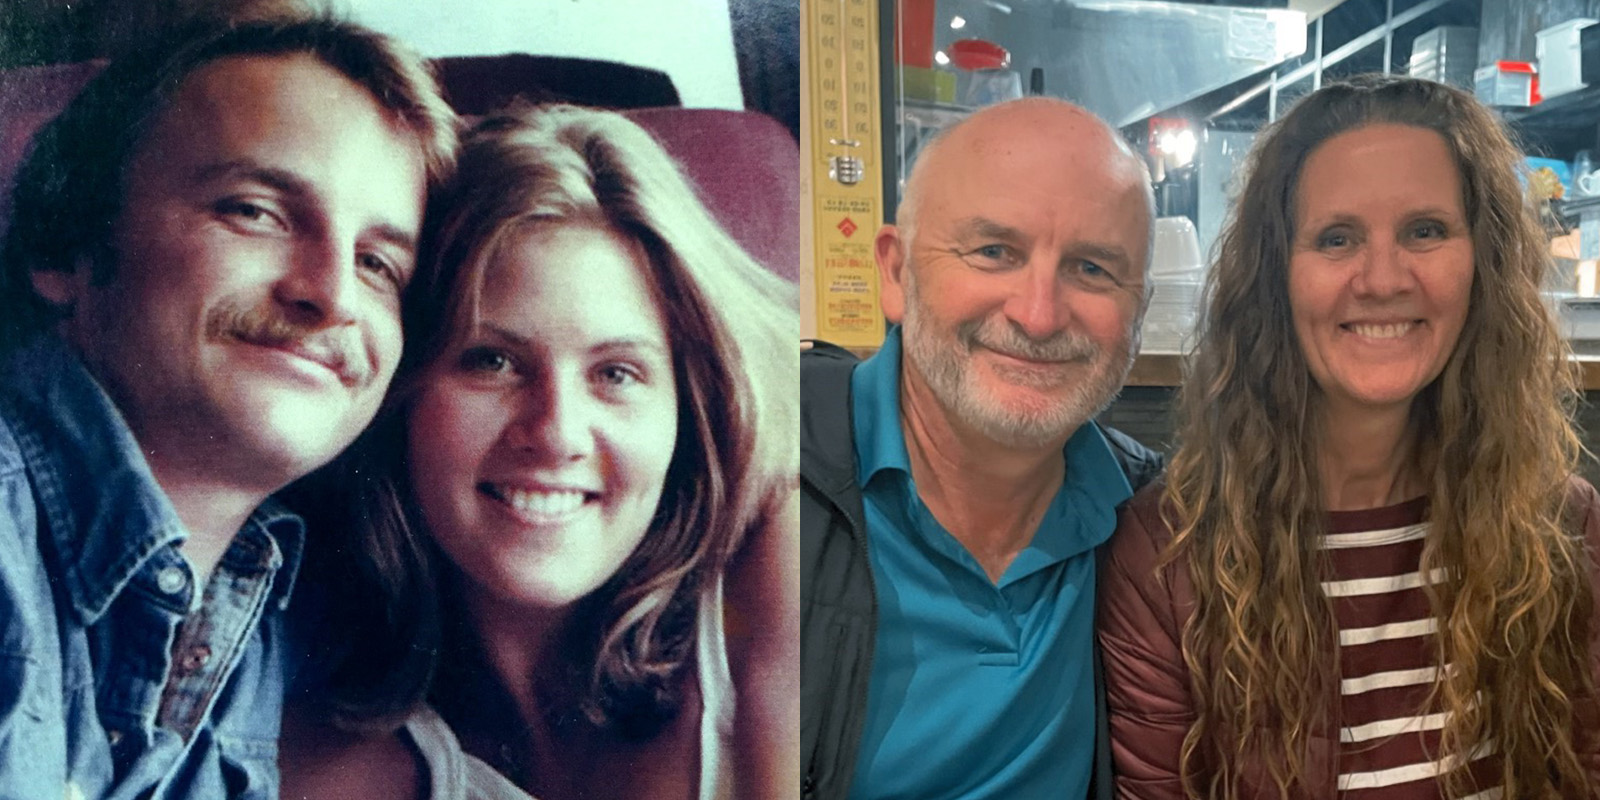 Side-by-side photos of alumni couple from the '80s and one from present day. Smiling to camera.